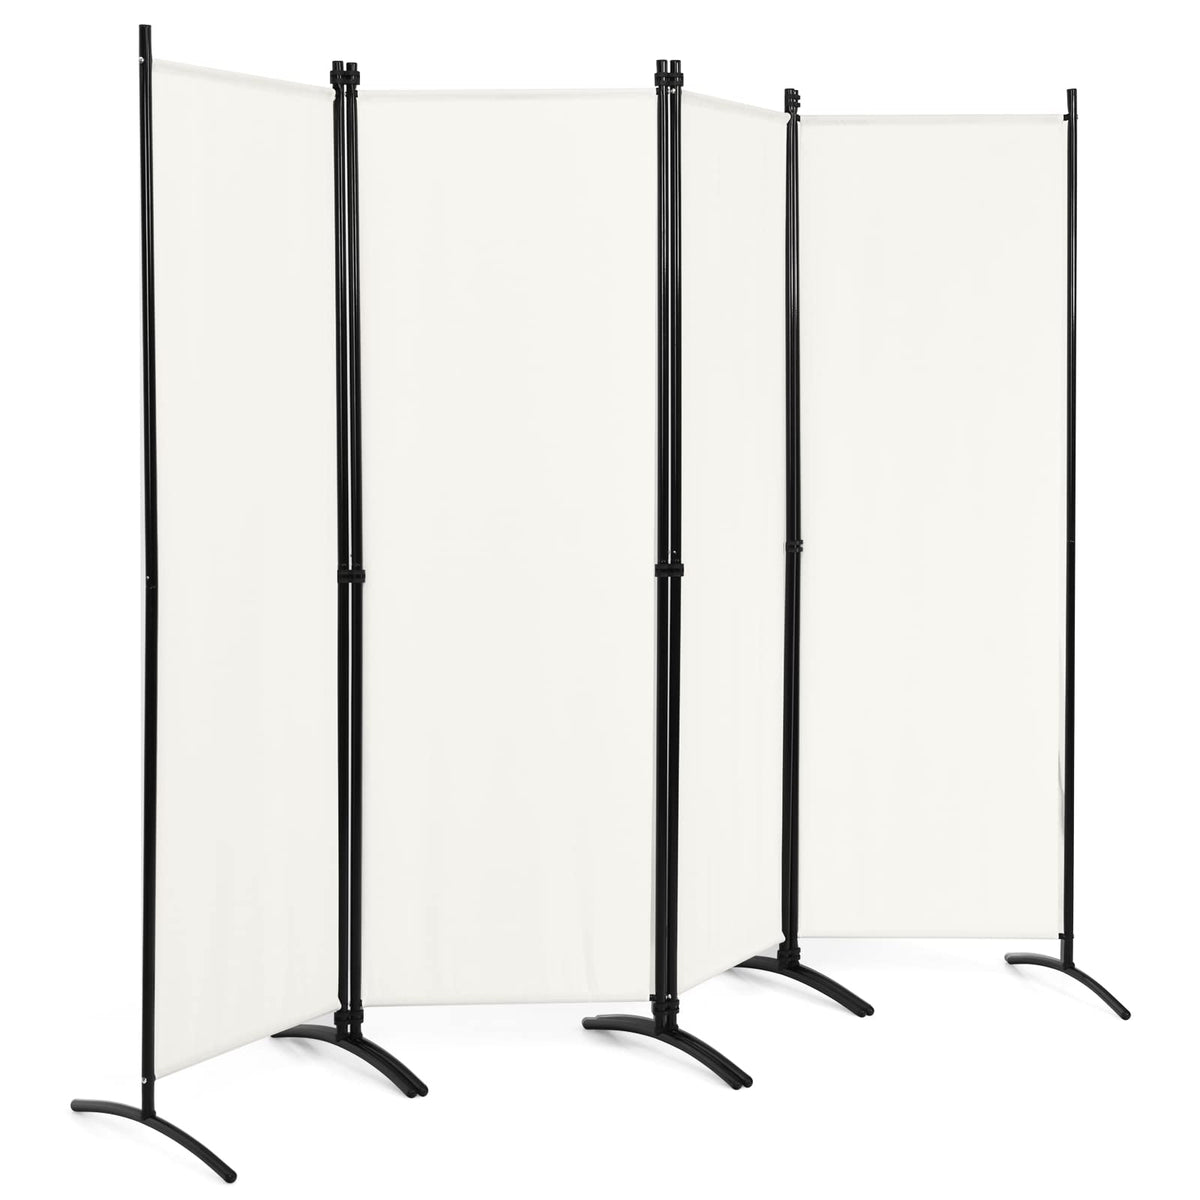 Giantex 4-Panel Room Divider, Folding Privacy Screen, Portable Fabric Wall Divider and Separator w/Steel Frame